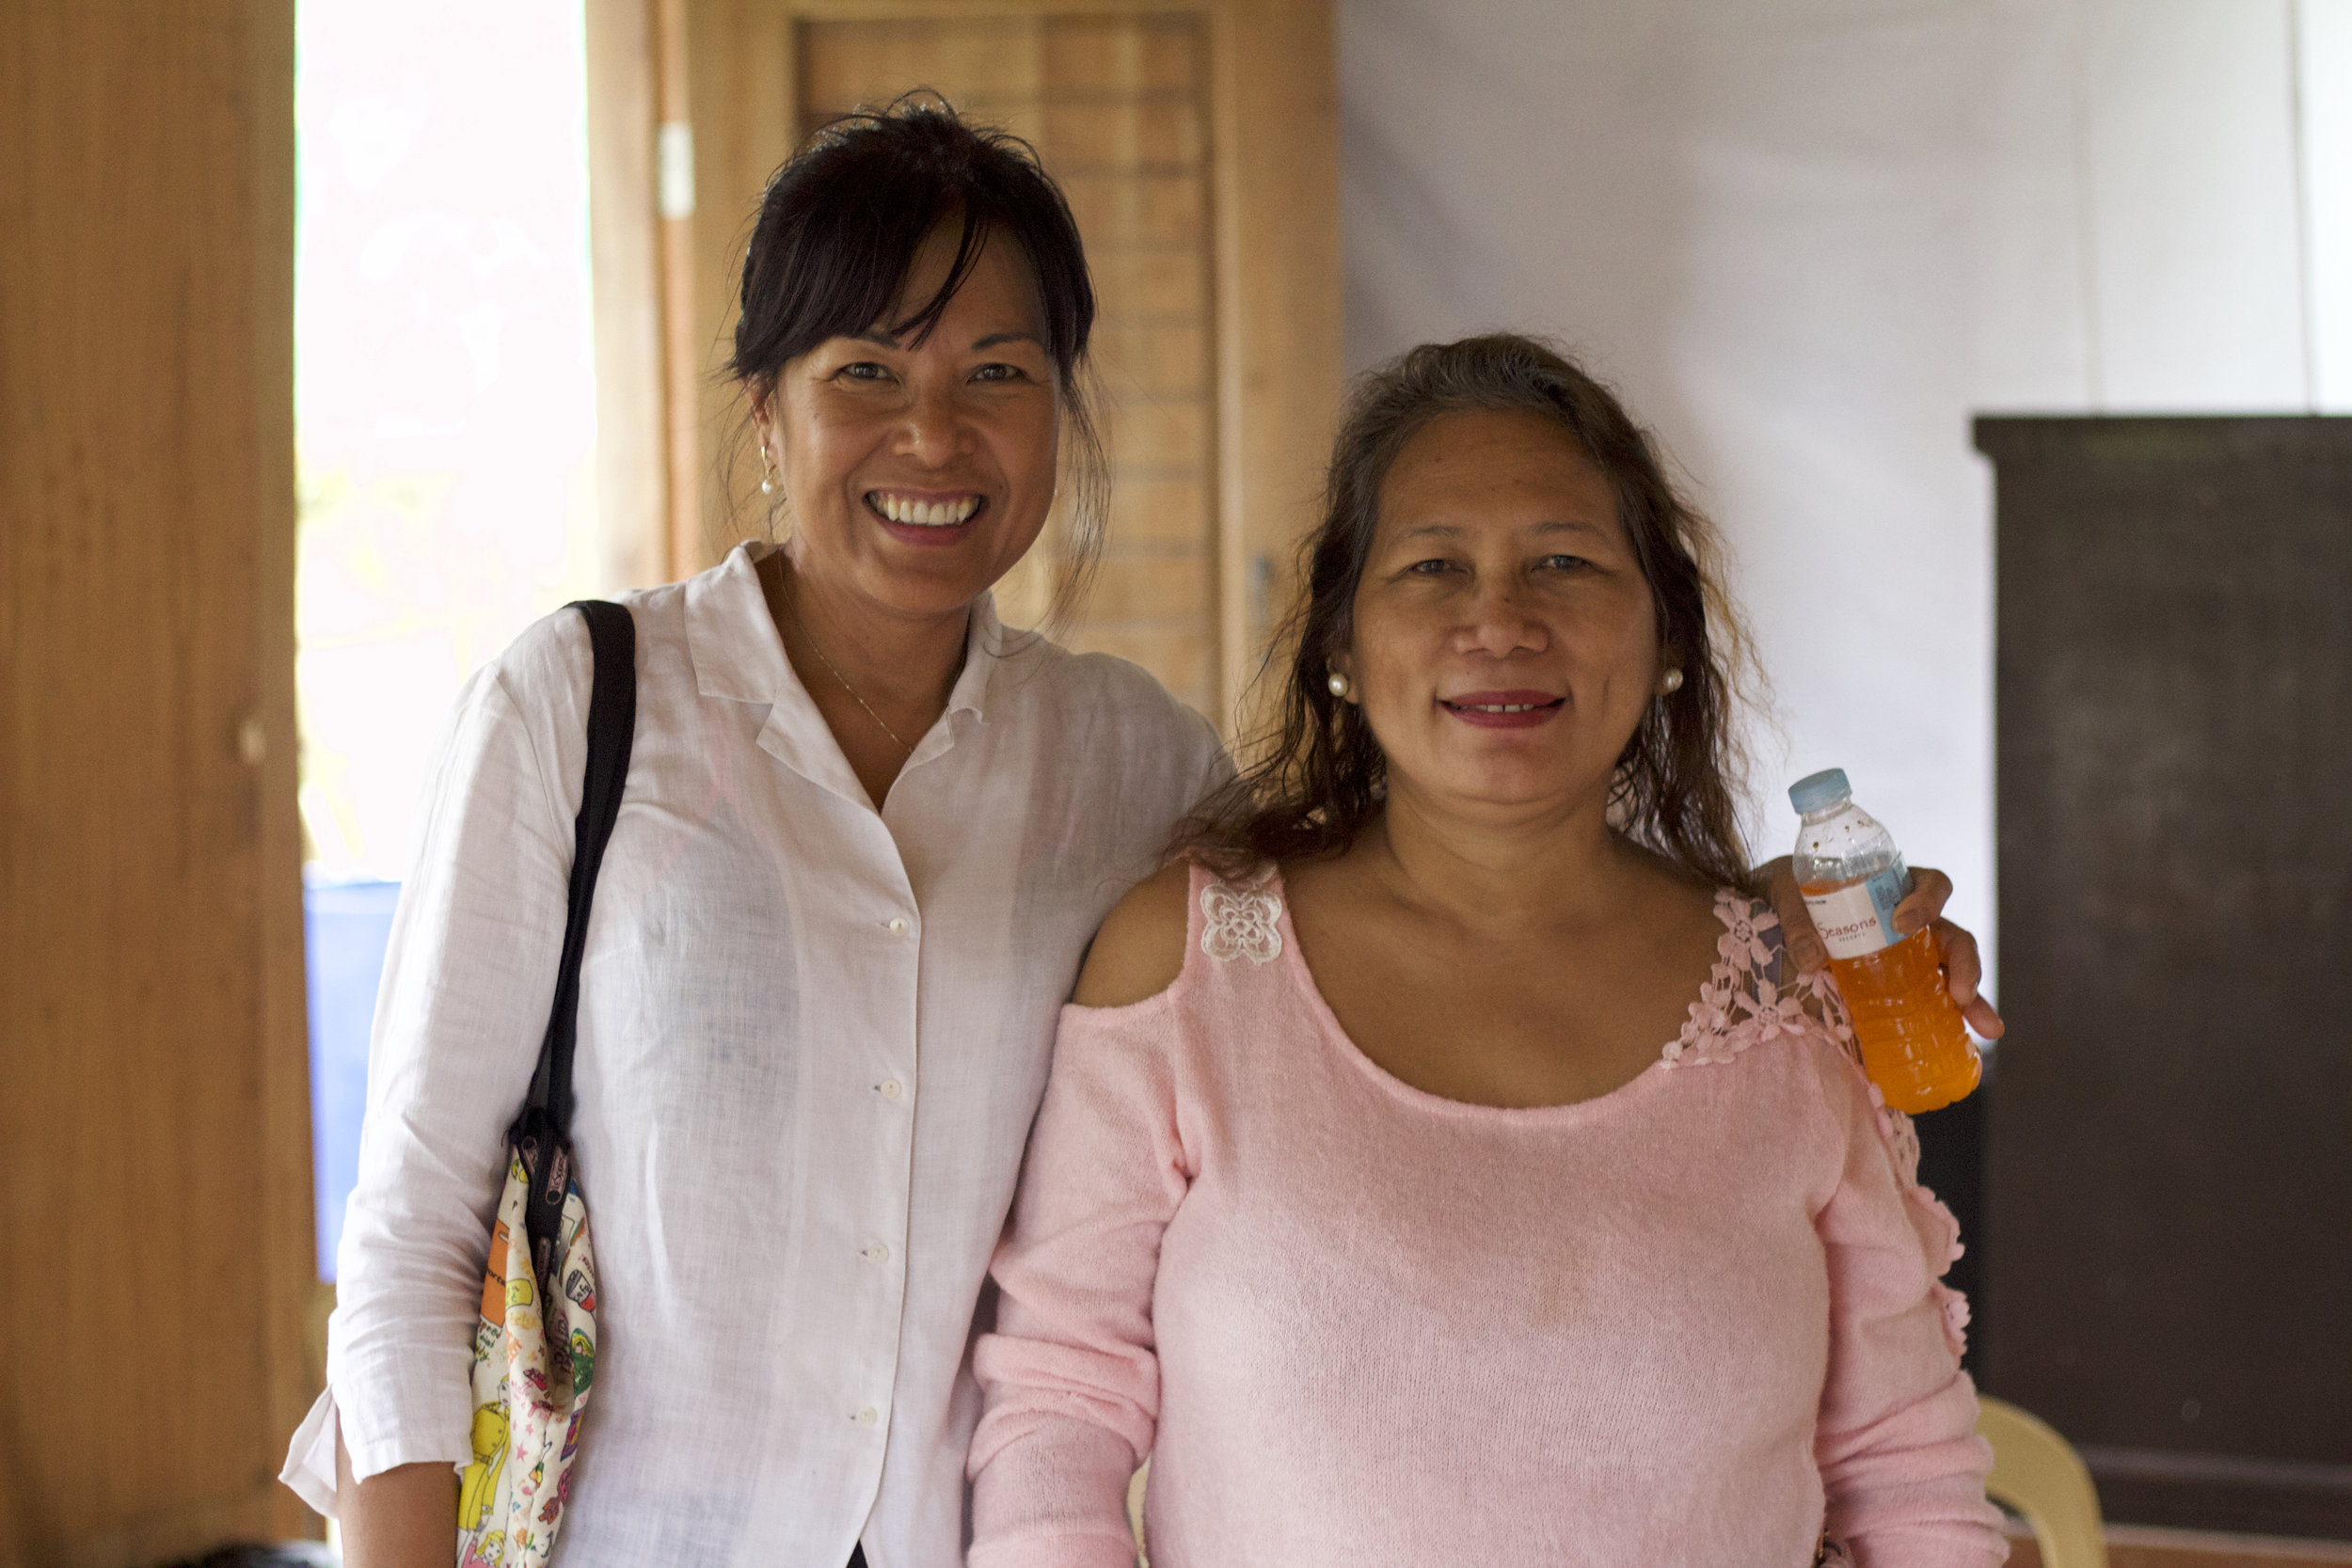  Grace Santos-Stutz has partnered with Pastor Marisa Familiara to provide education and medical and dental services to the Ati Village in Boracay 